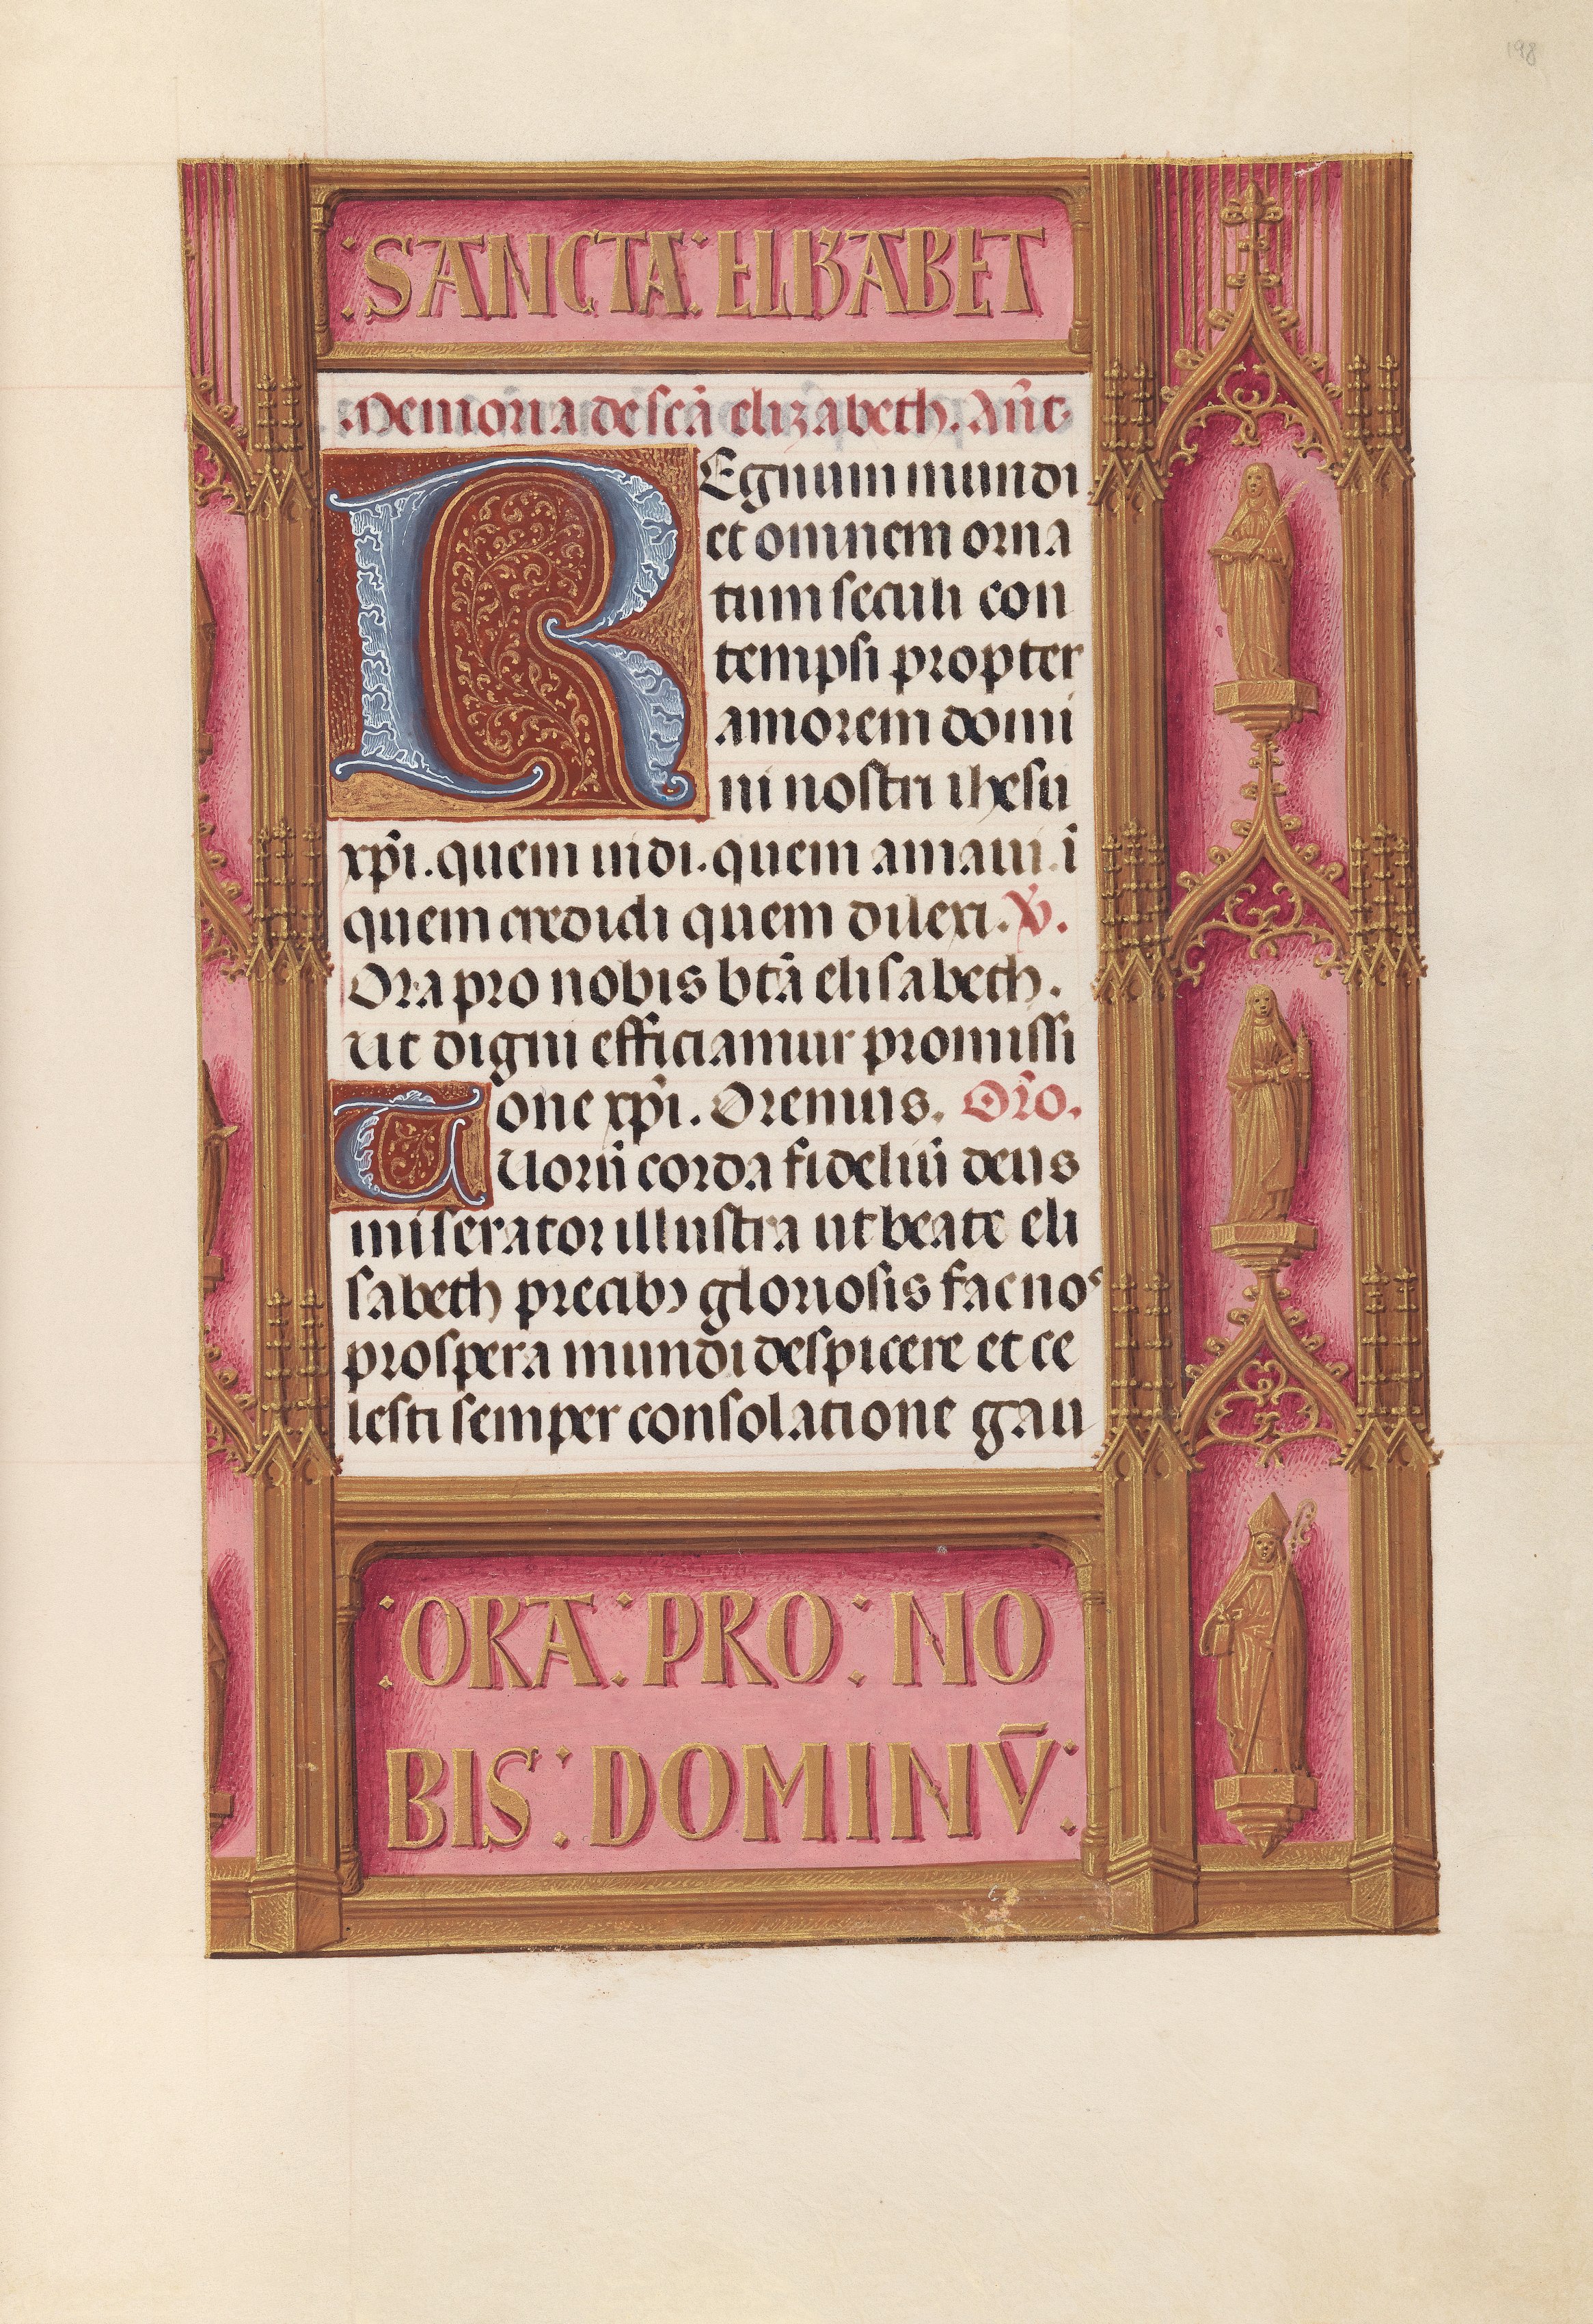 Hours of Queen Isabella the Catholic, Queen of Spain:  Fol. 198r